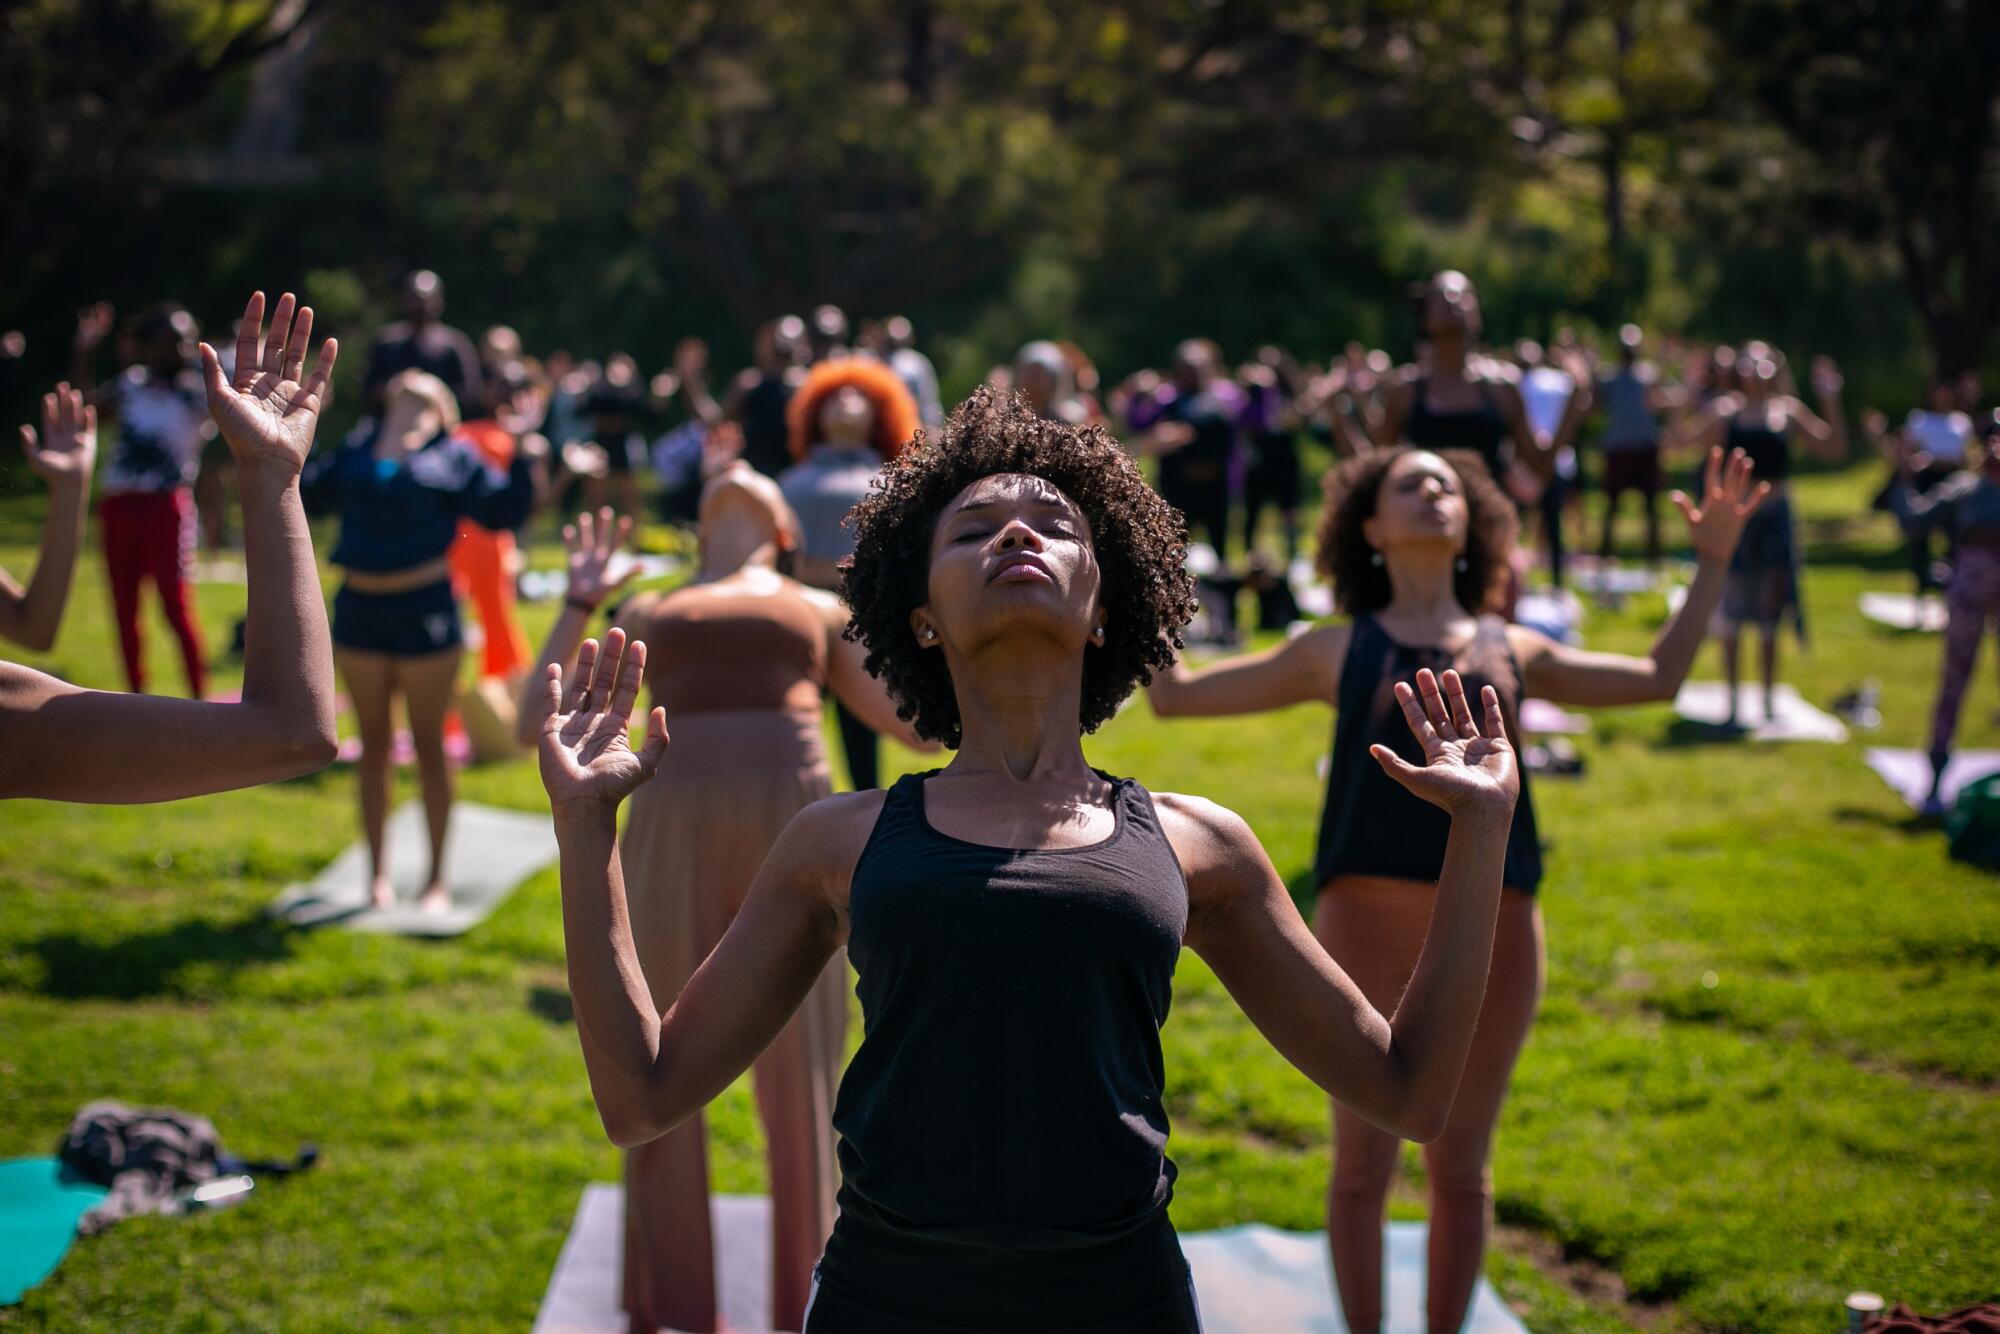 Around 200 community members raise their arms and close their eyes during yoga in a park